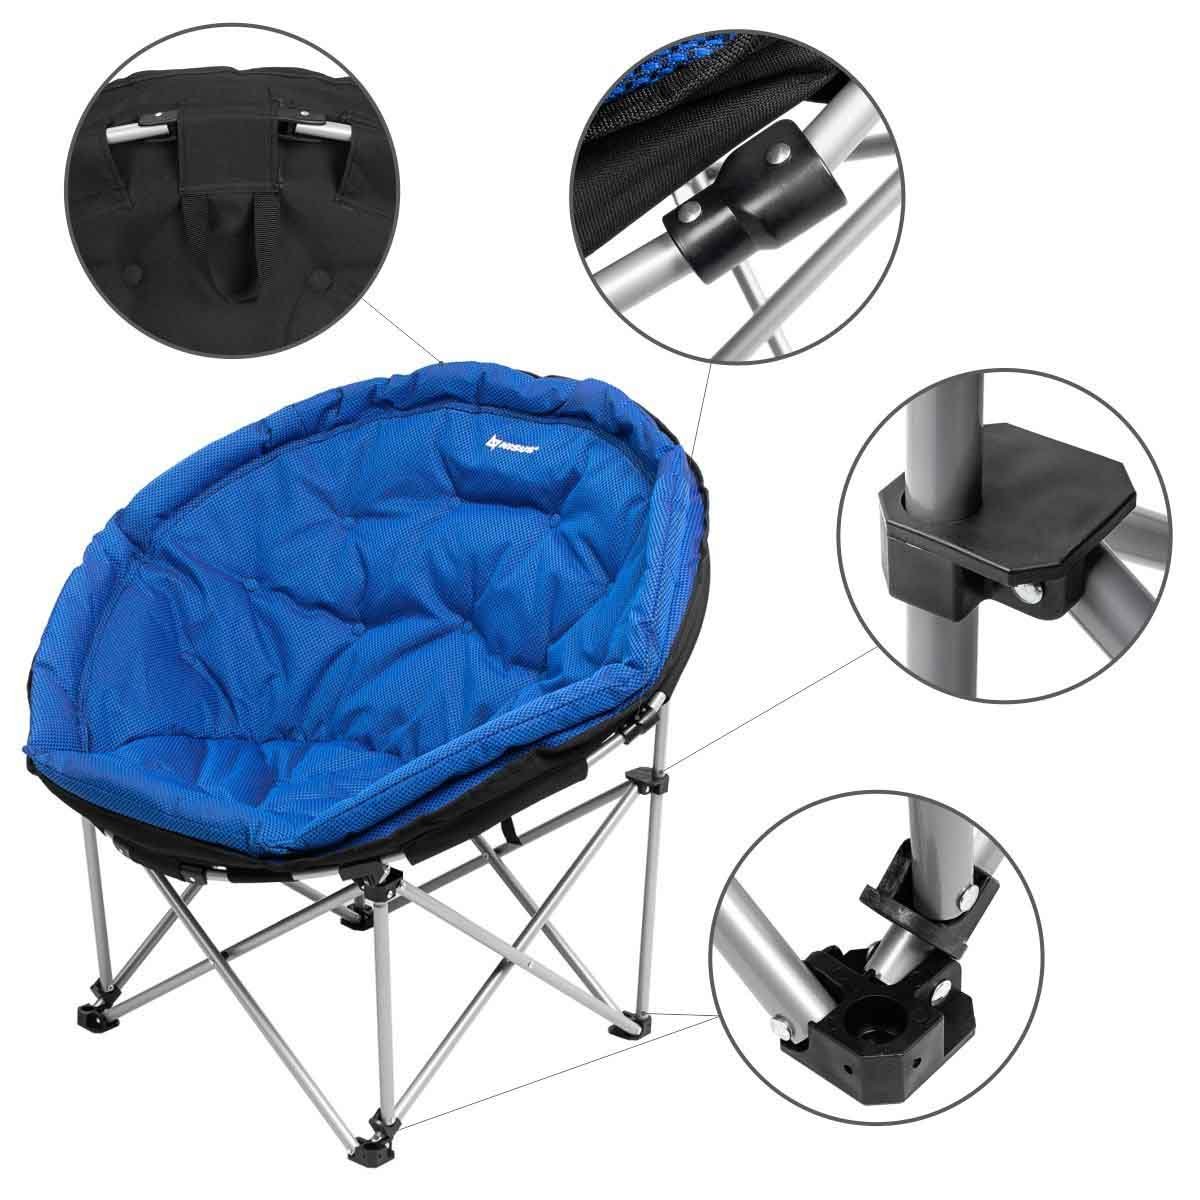 Moon Big Folding Padded Saucer Chair with Carrying Bag